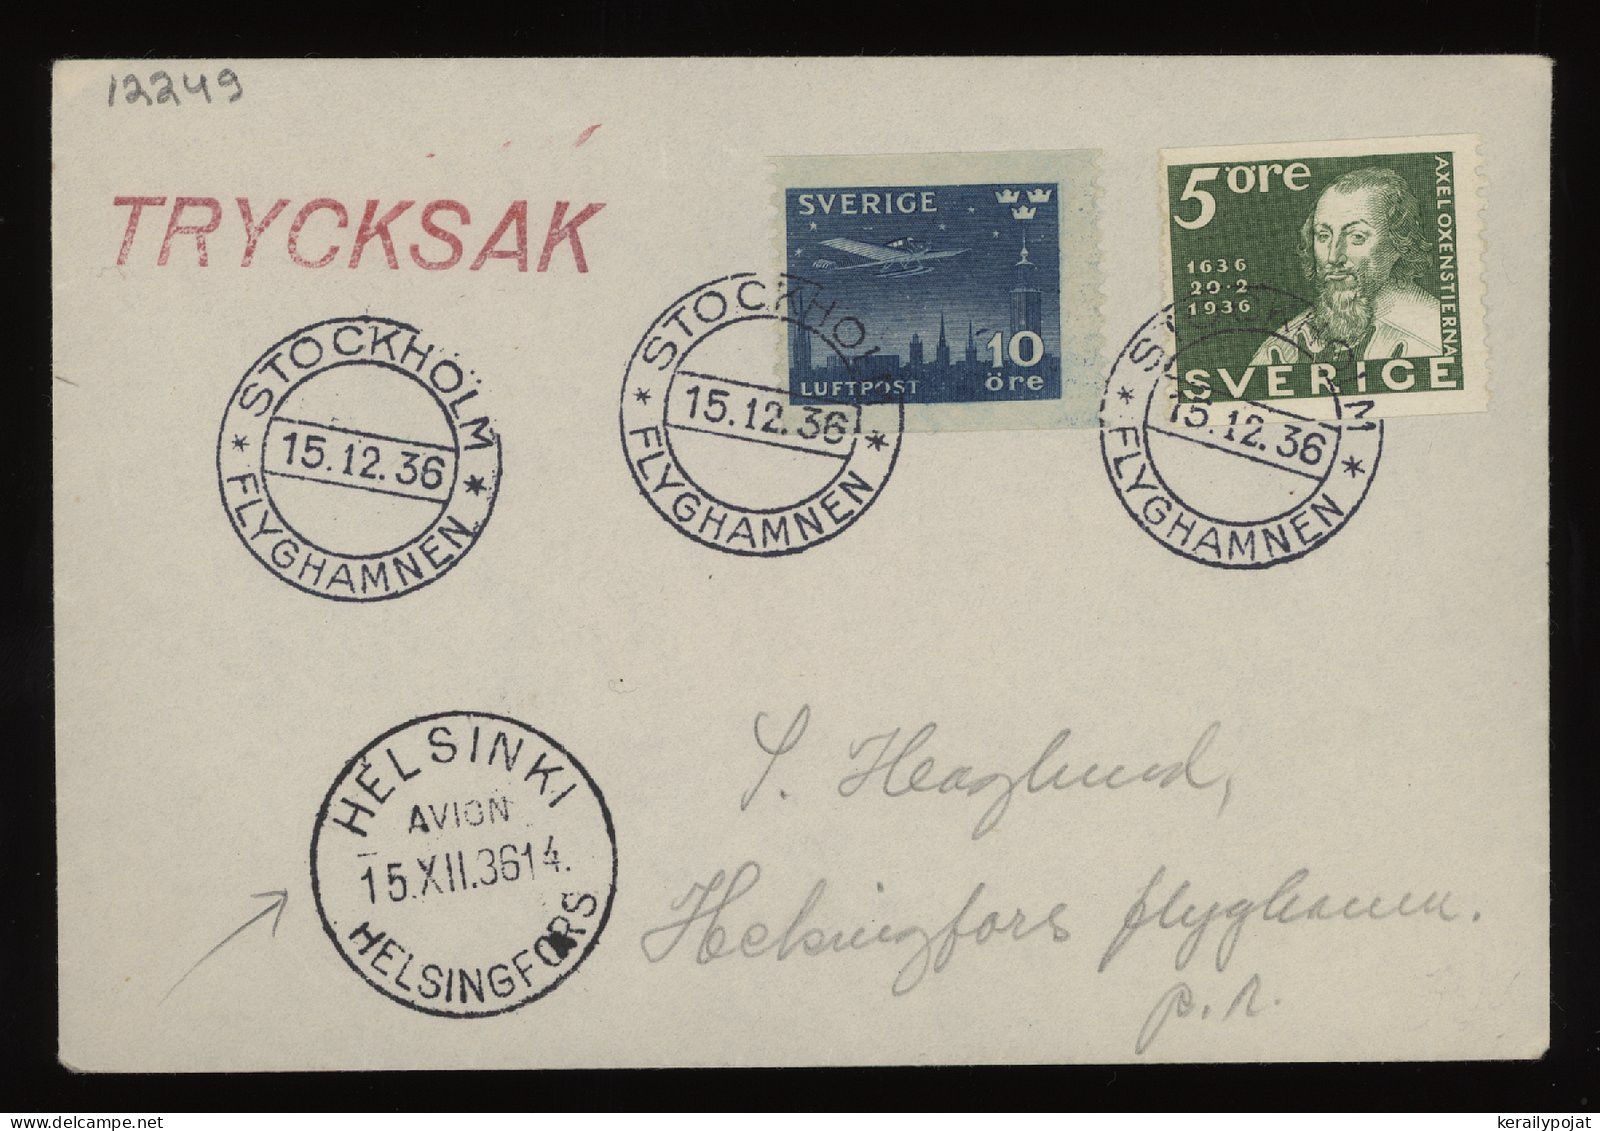 Sweden 1936 Stockholm Air Mail Cover To Finland__(12249) - Covers & Documents